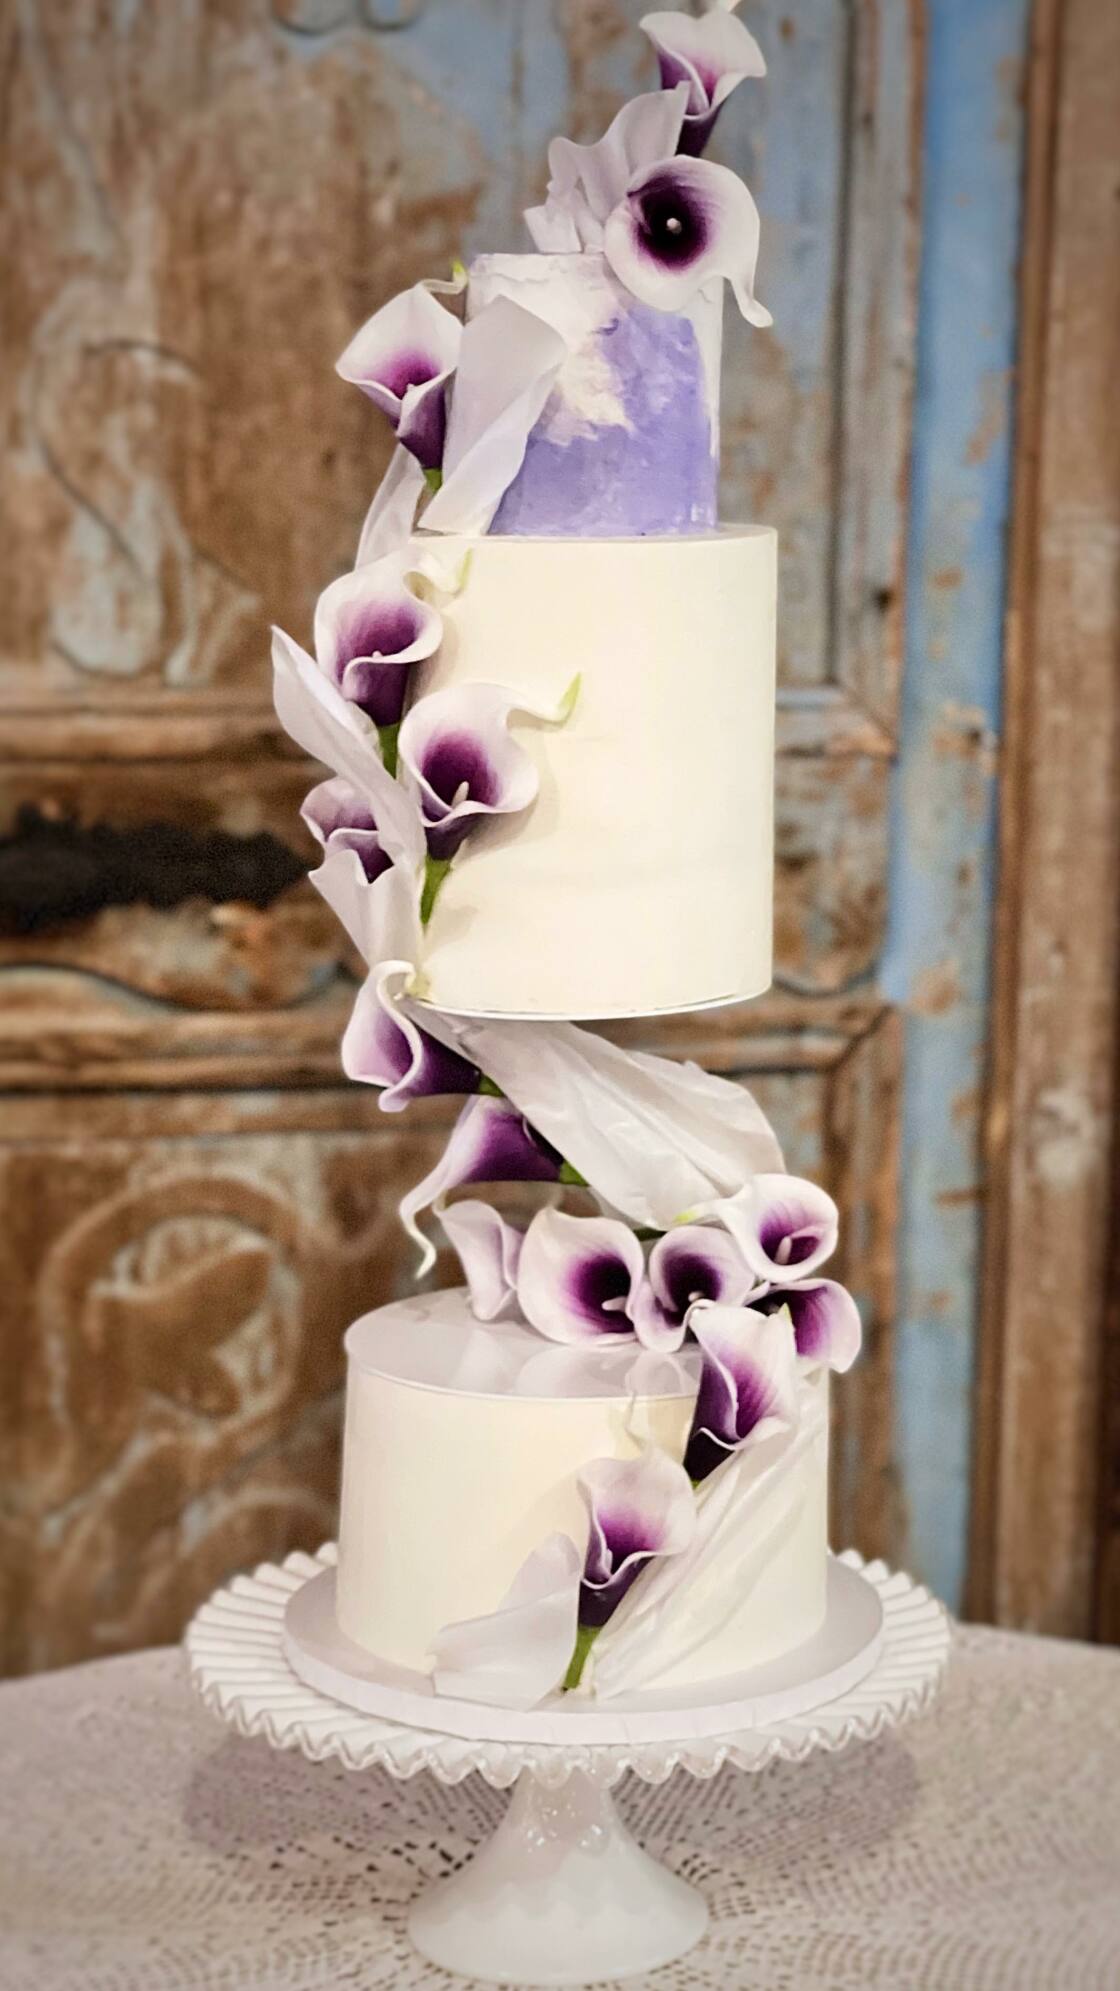 SweetThings: Simple and Elegant Wedding Cake with Calla Lilies